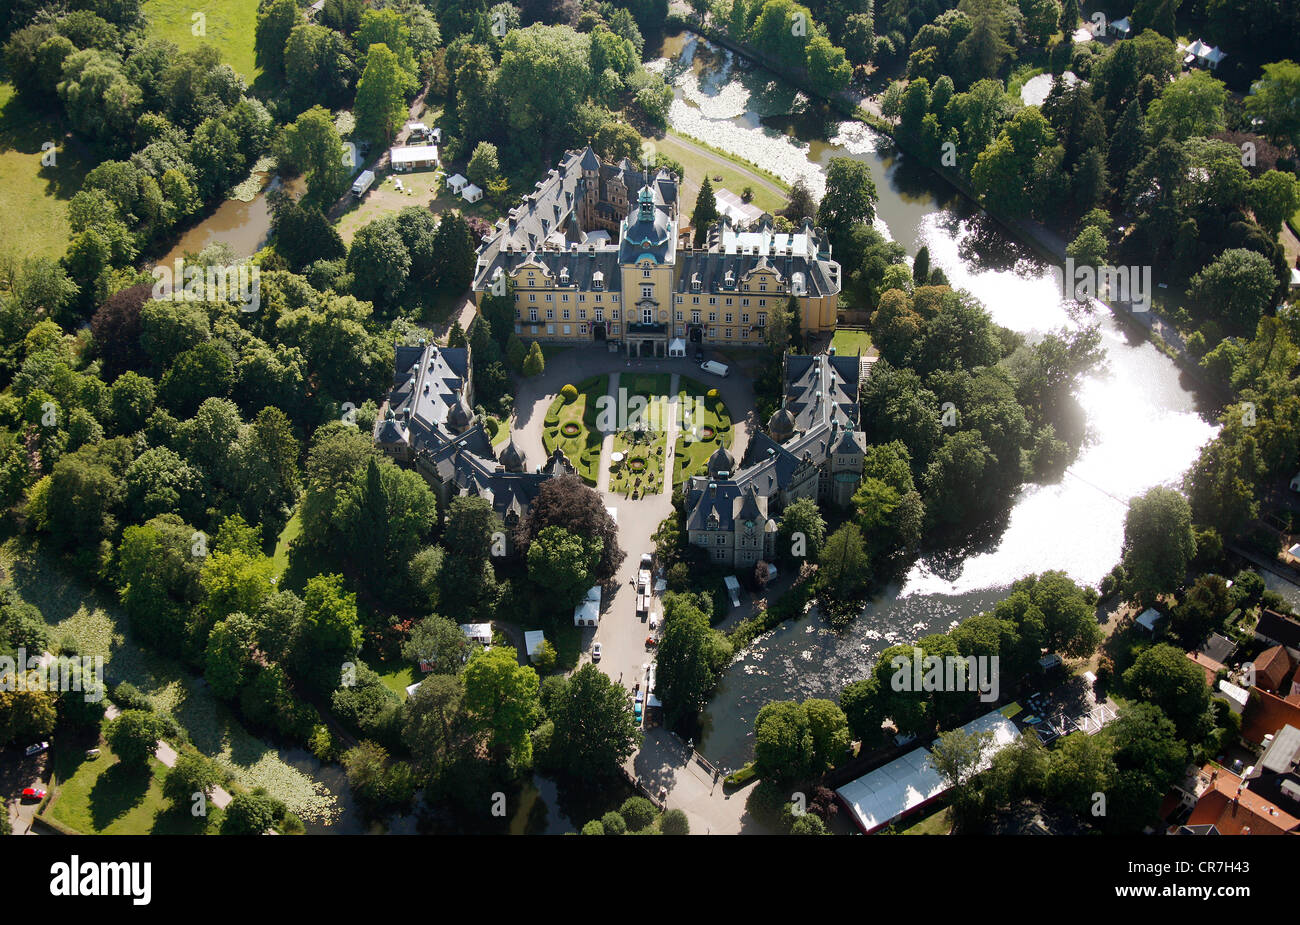 Aerial view, Bueckeburg castle, district of Schaumburg, Lower Saxony, Germany, Europe Stock Photo